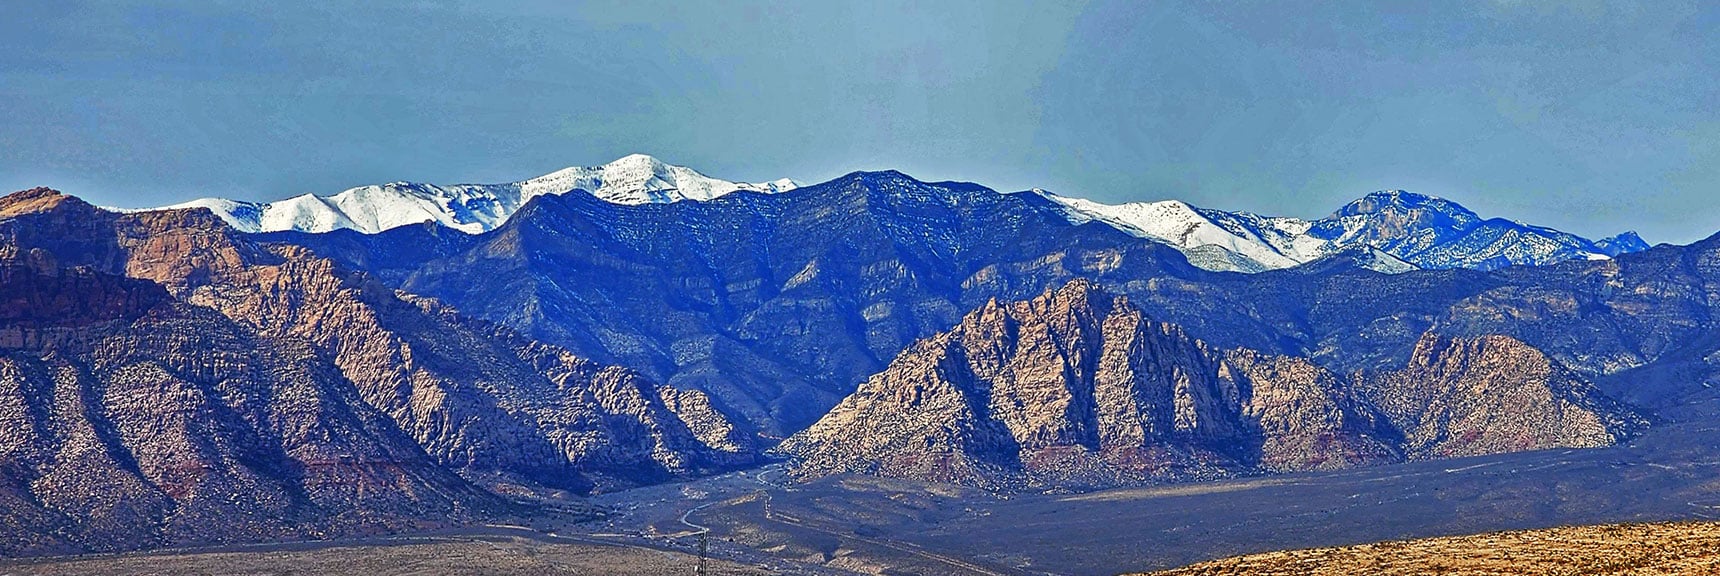 Zooming in on Mt. Charleston Wilderness. Griffith Peak (left) to Mummy Mt. (right) | Western Outer Circuit | Blue Diamond Hill | Red Rock Canyon, Nevada